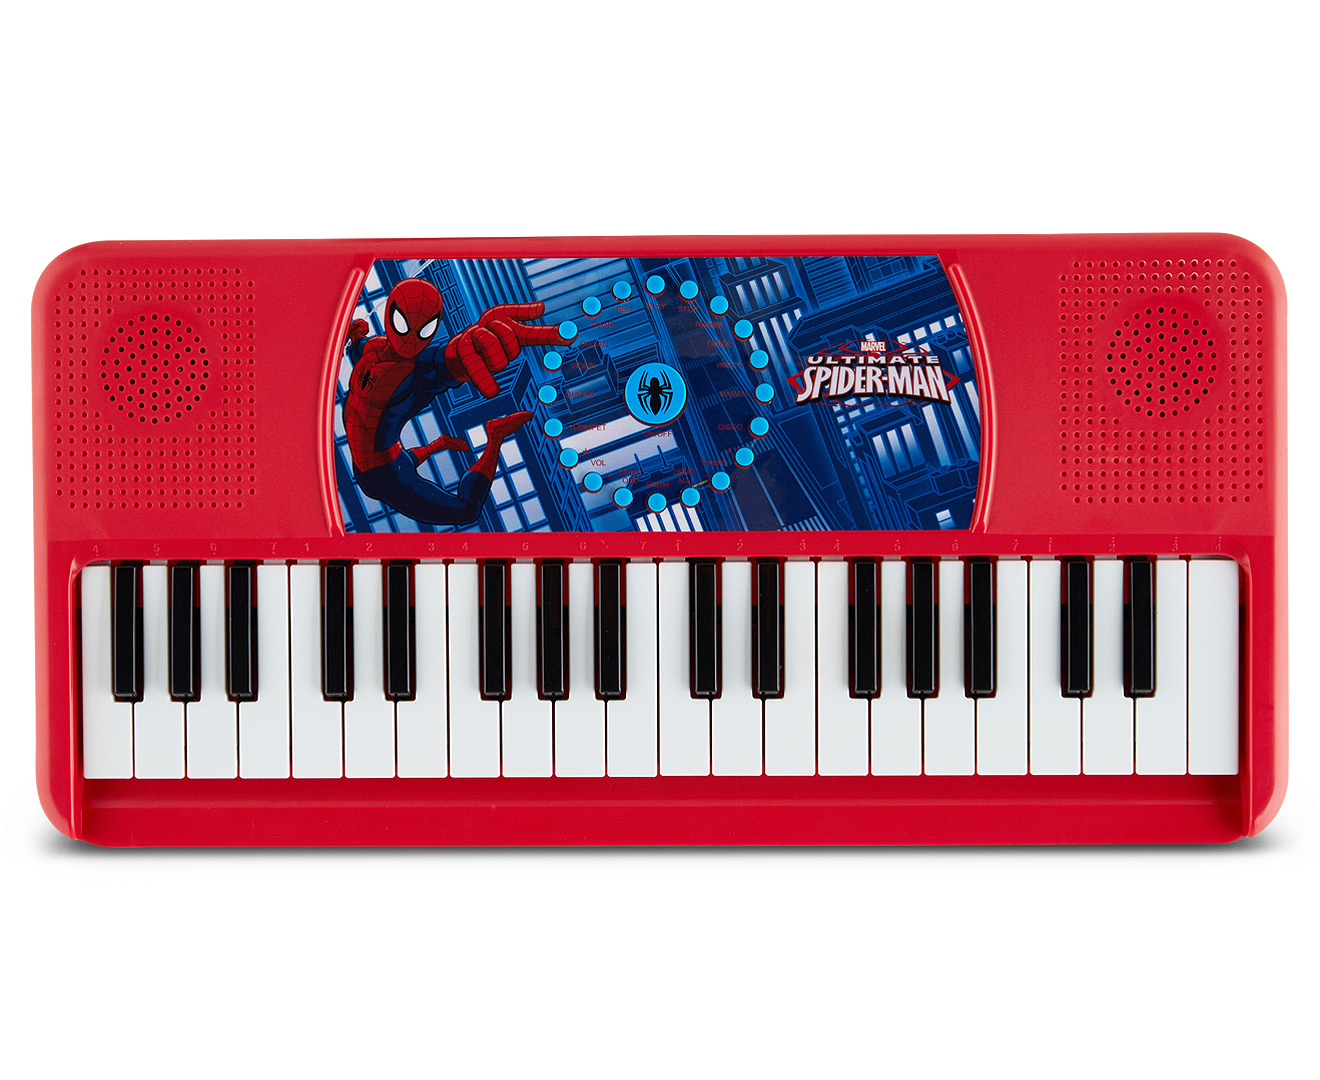 The Ultimate Spiderman Classic Electric Keyboard - Red/Blue